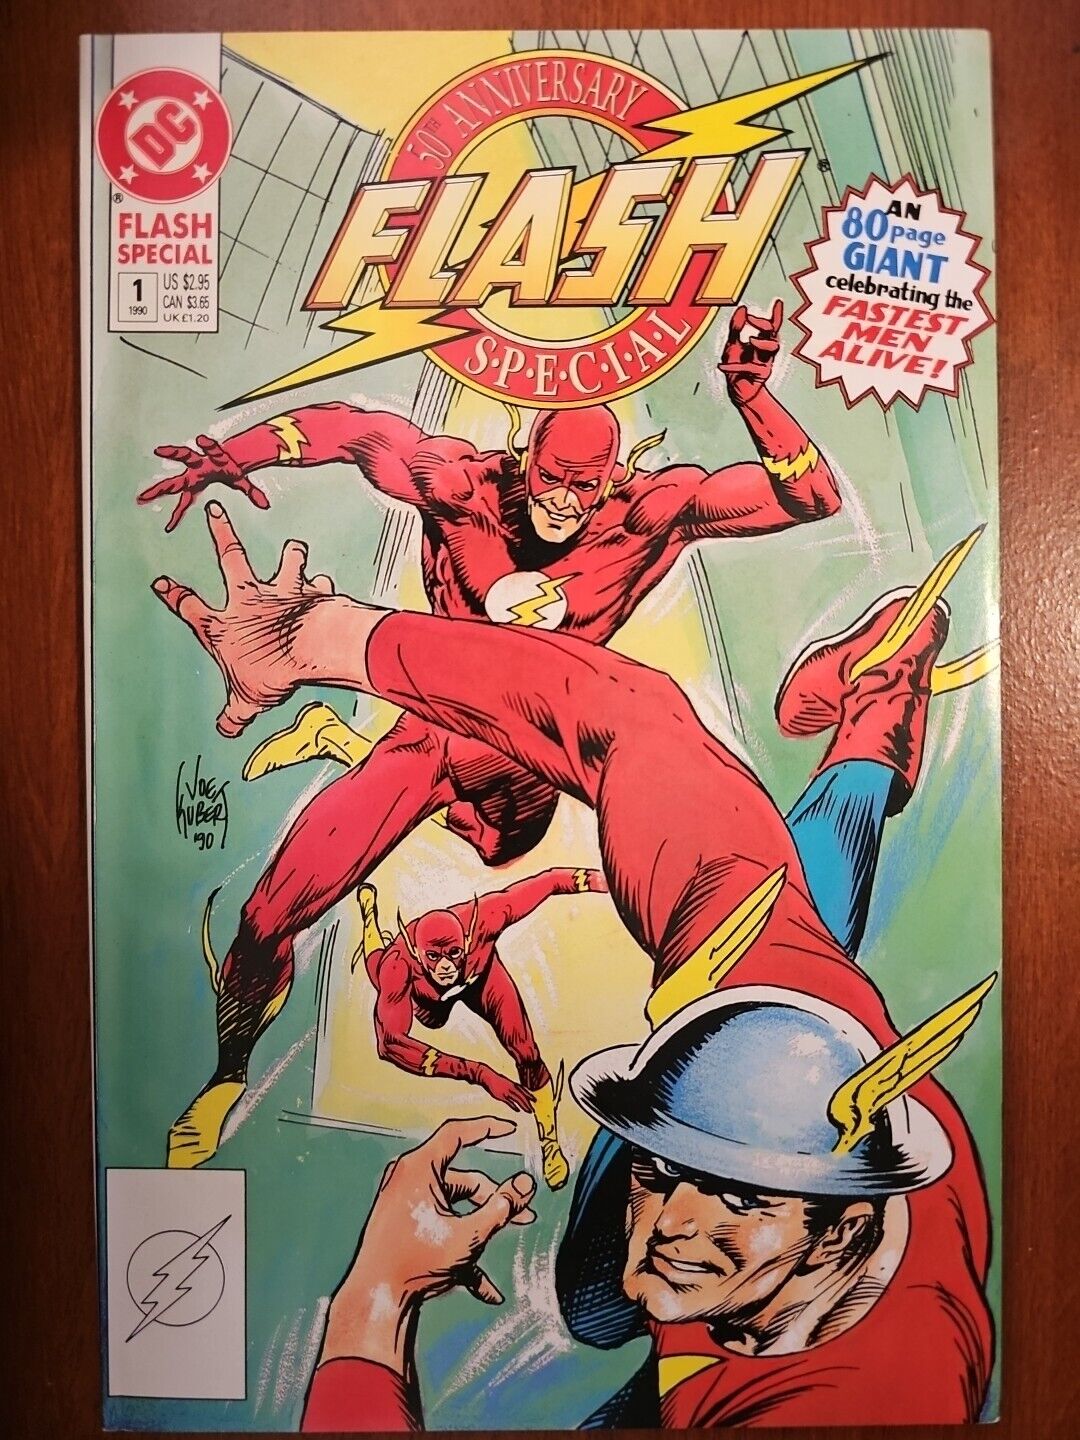 1990 FLASH SPECIAL #1 BAGGED AND BOARDED